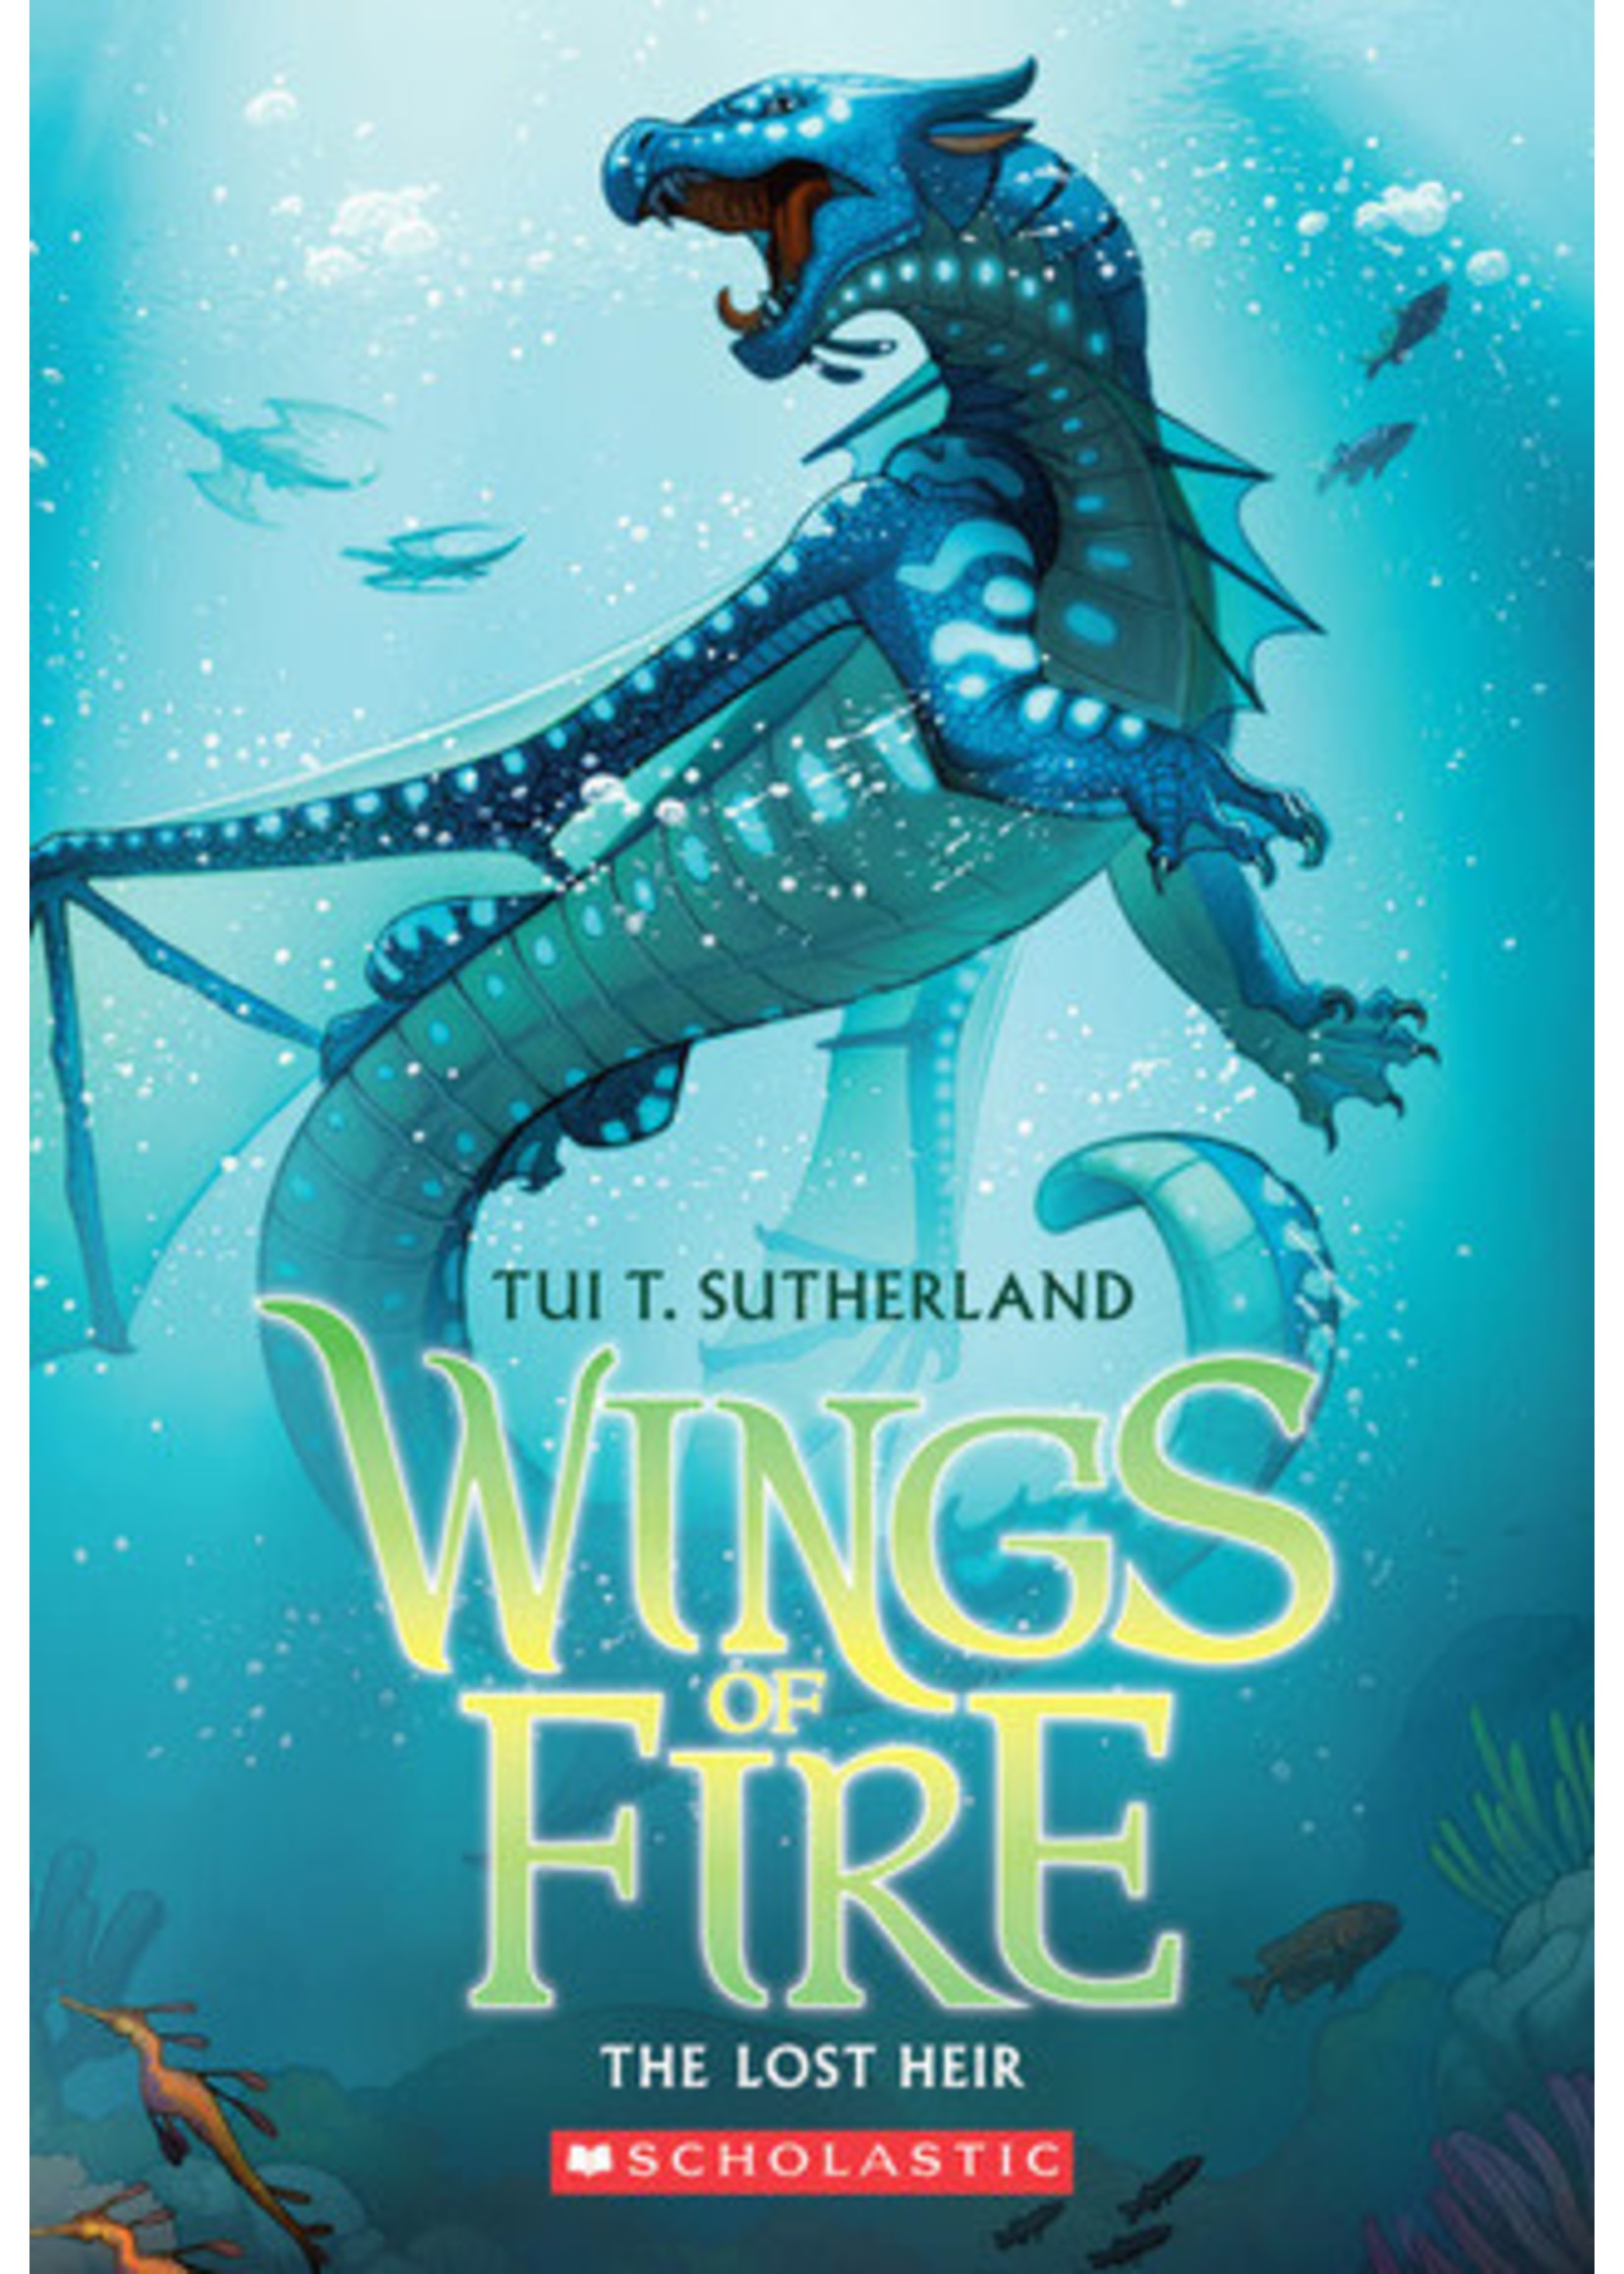 The Lost Heir (Wings of Fire #2) by Tui T. Sutherland